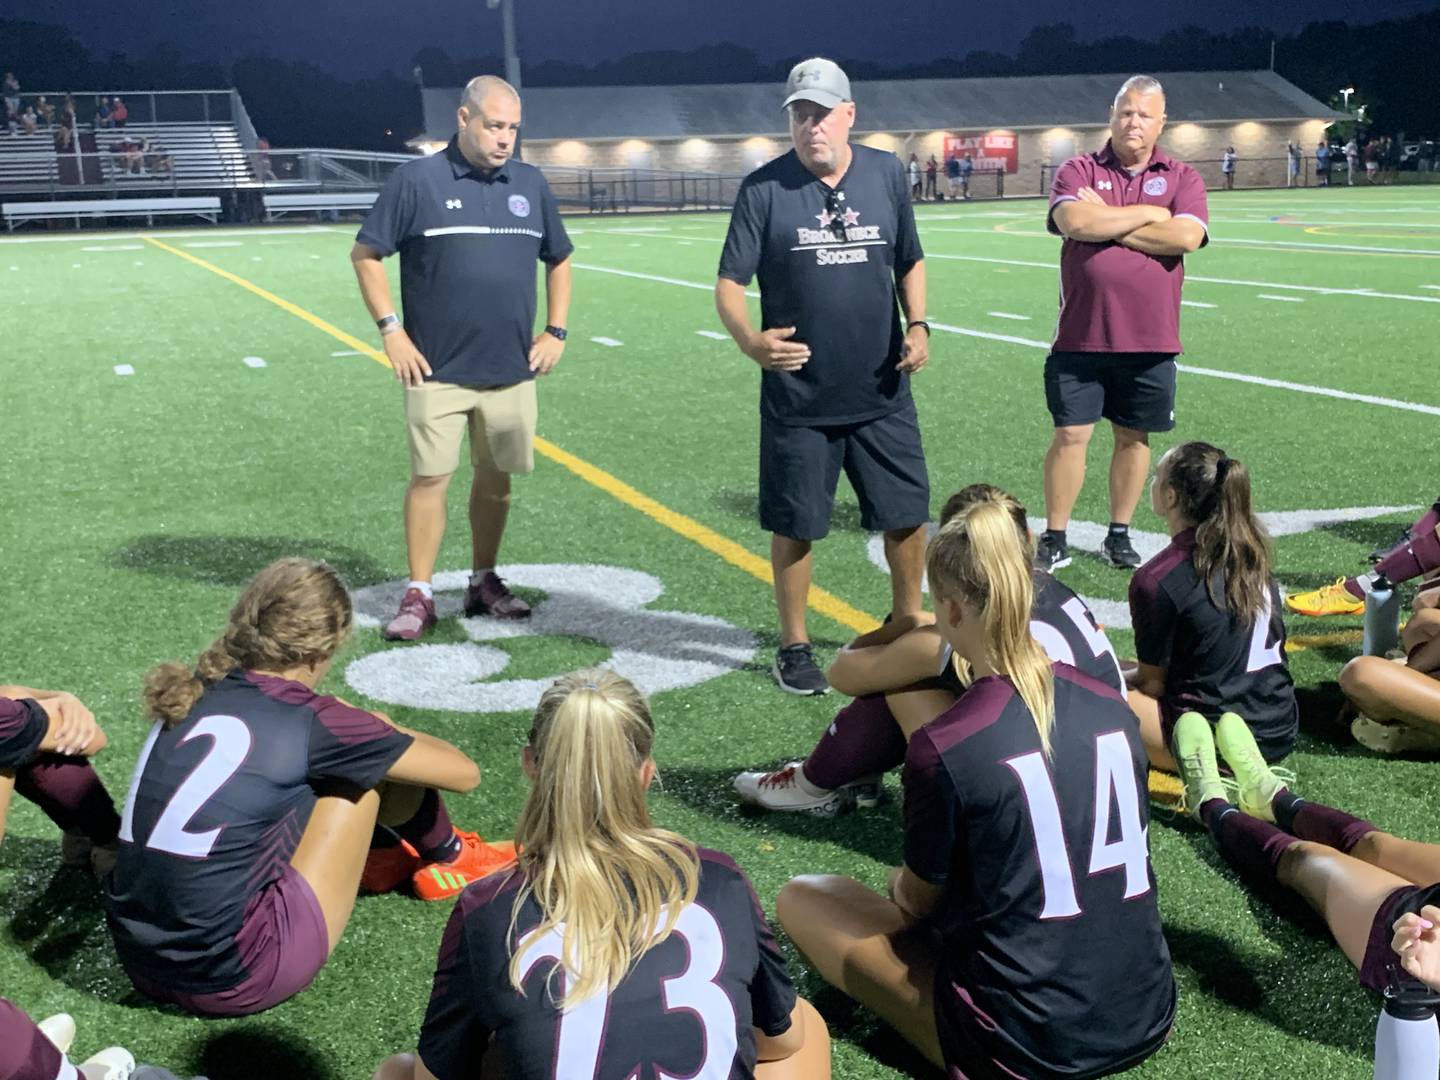 Broadneck girls soccer coach John Camm discusses lessons learned after his 5th-ranked Bruins played No. 2 Archbishop Spalding to a scoreless draw Tuesday night.